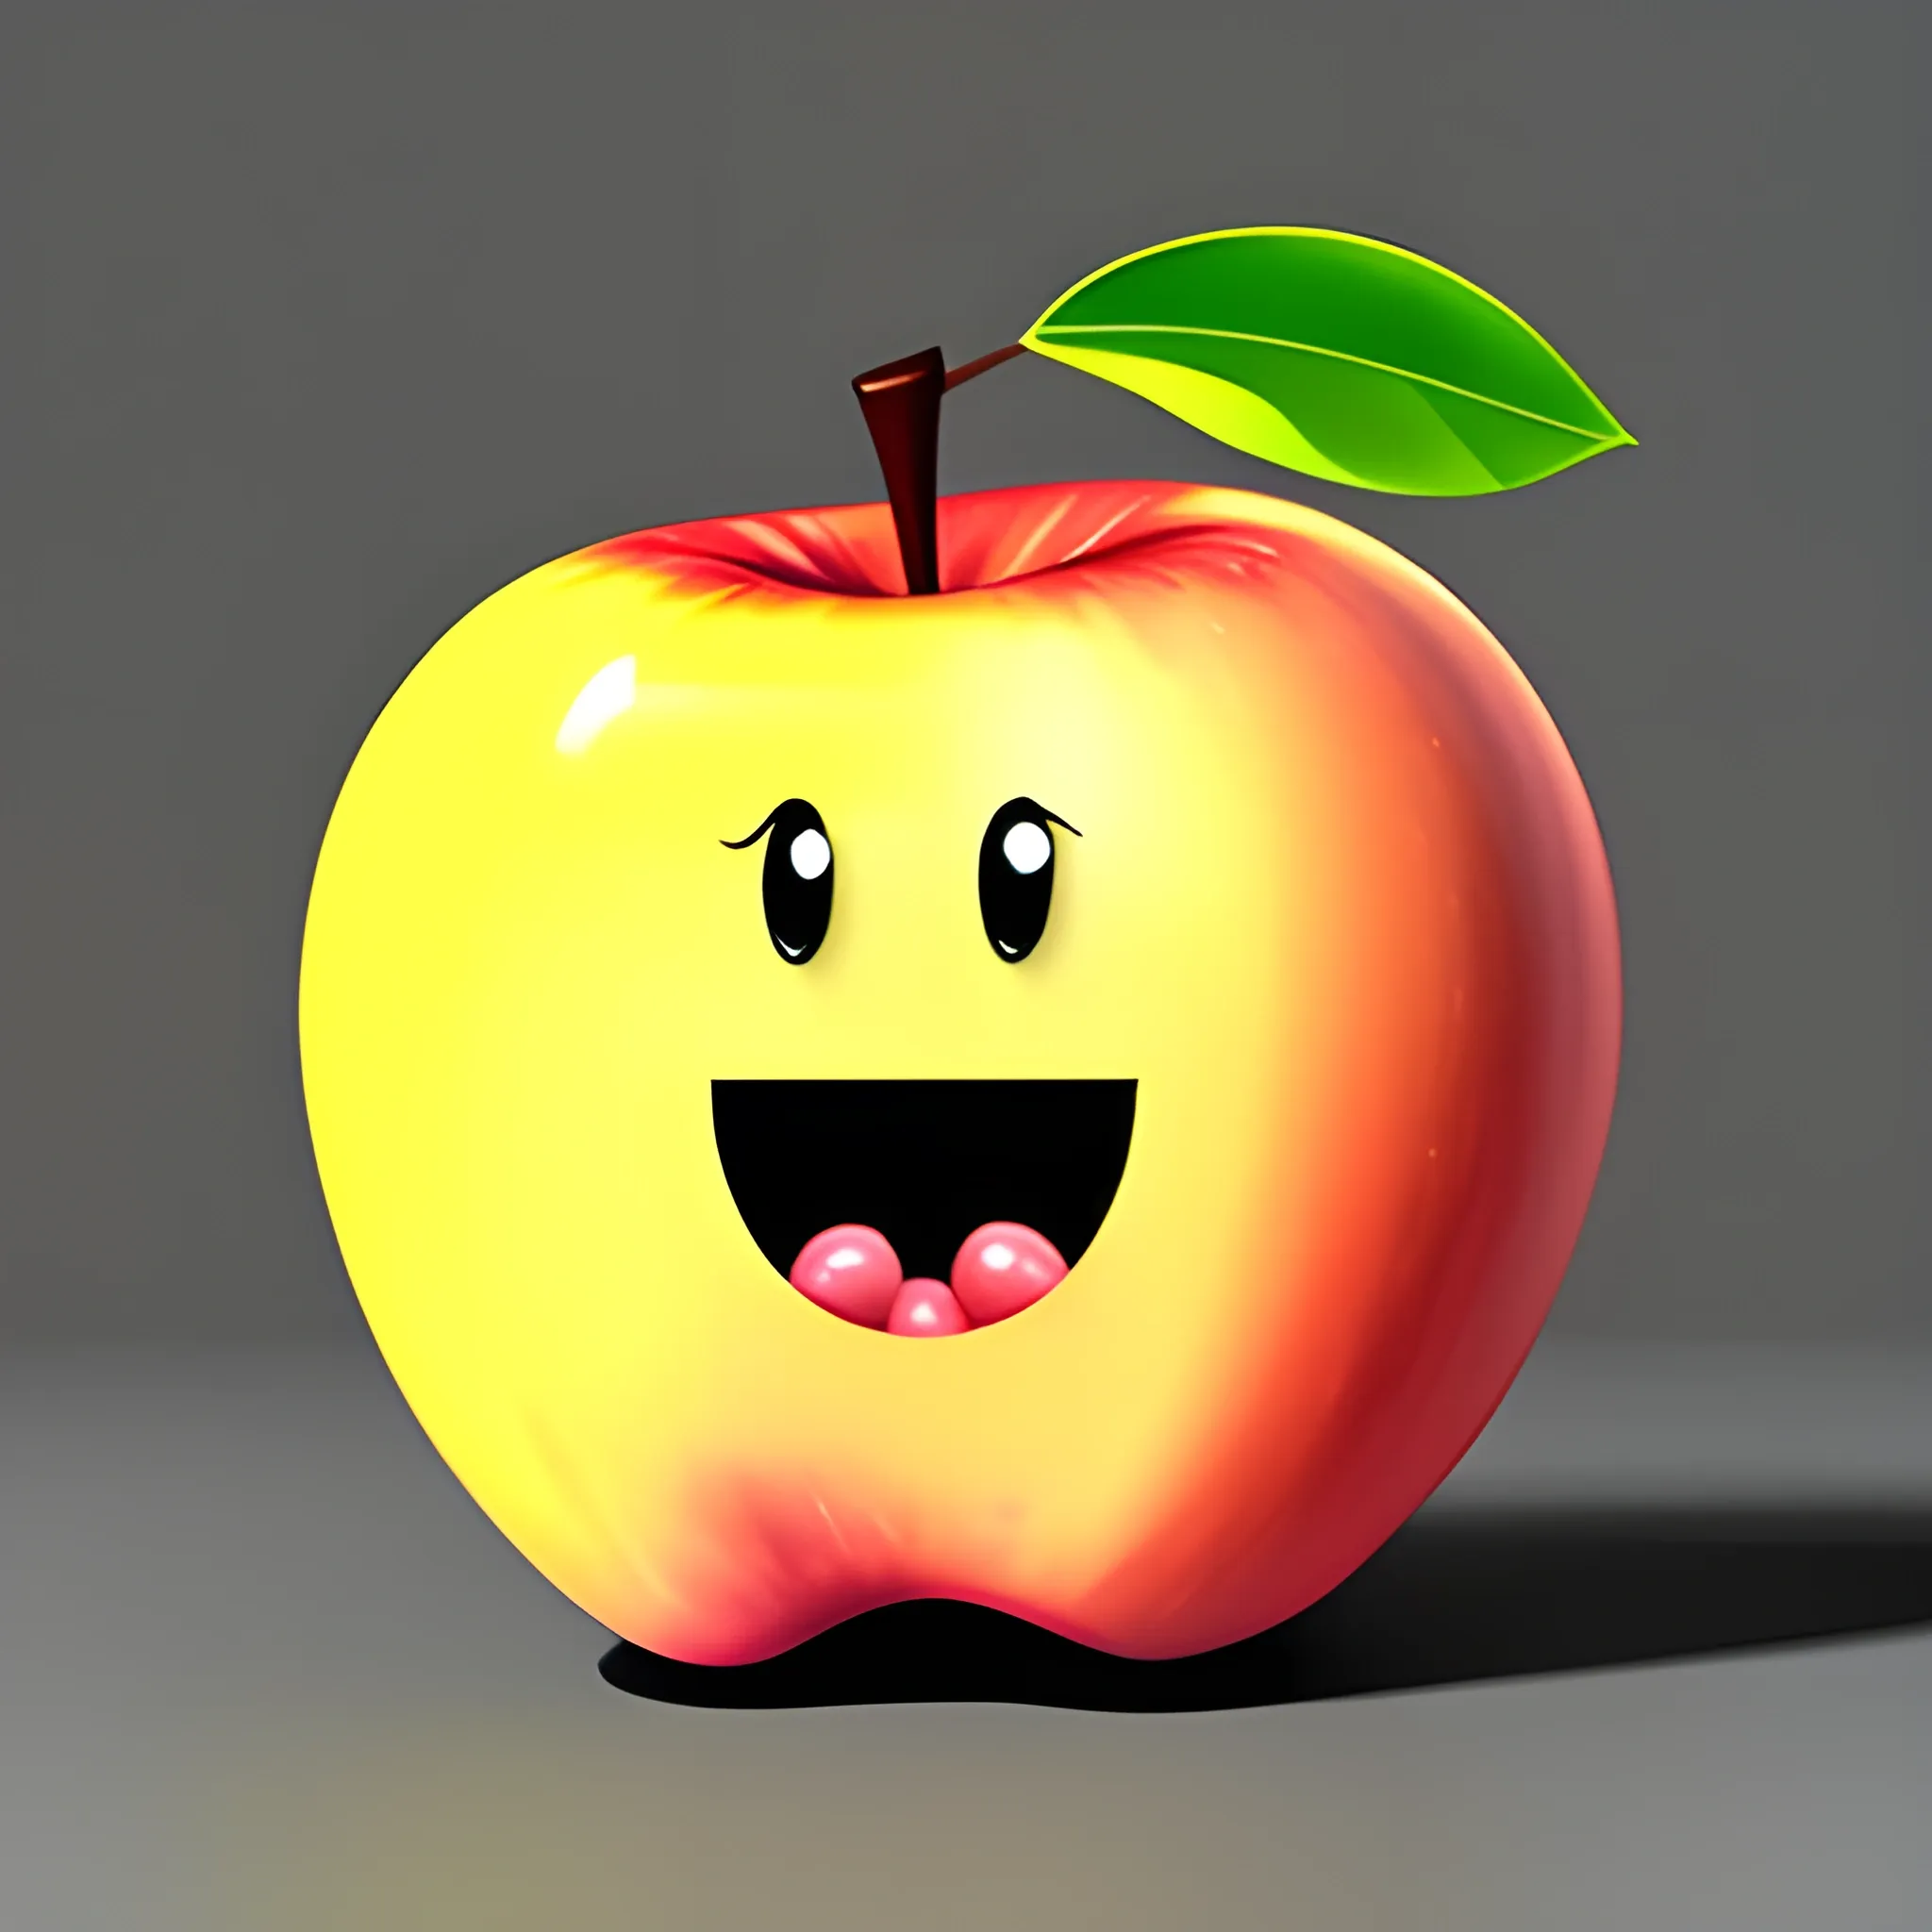 , Cartoon, a cute apple is crying, child friendly





